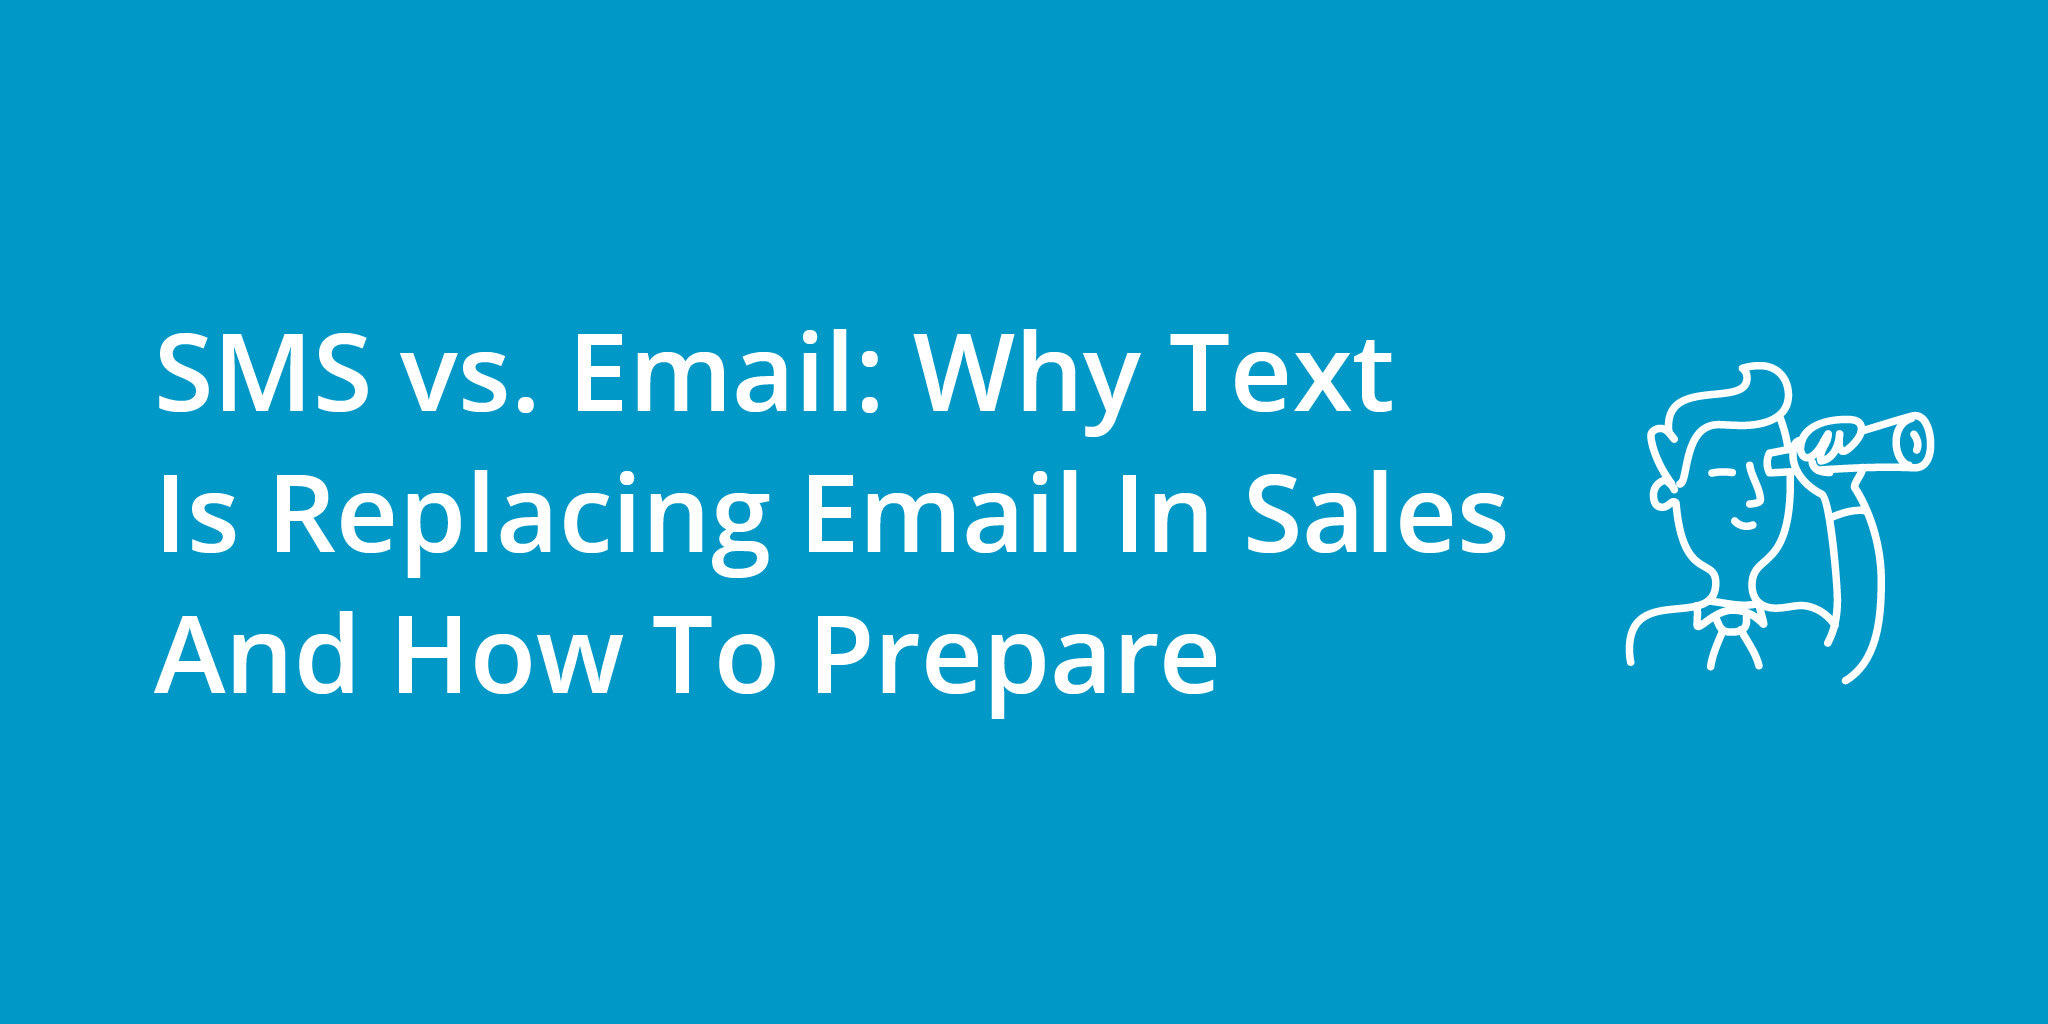 SMS vs. Email: Why Text Is Replacing Email In Sales And How To Prepare | Telephones for business